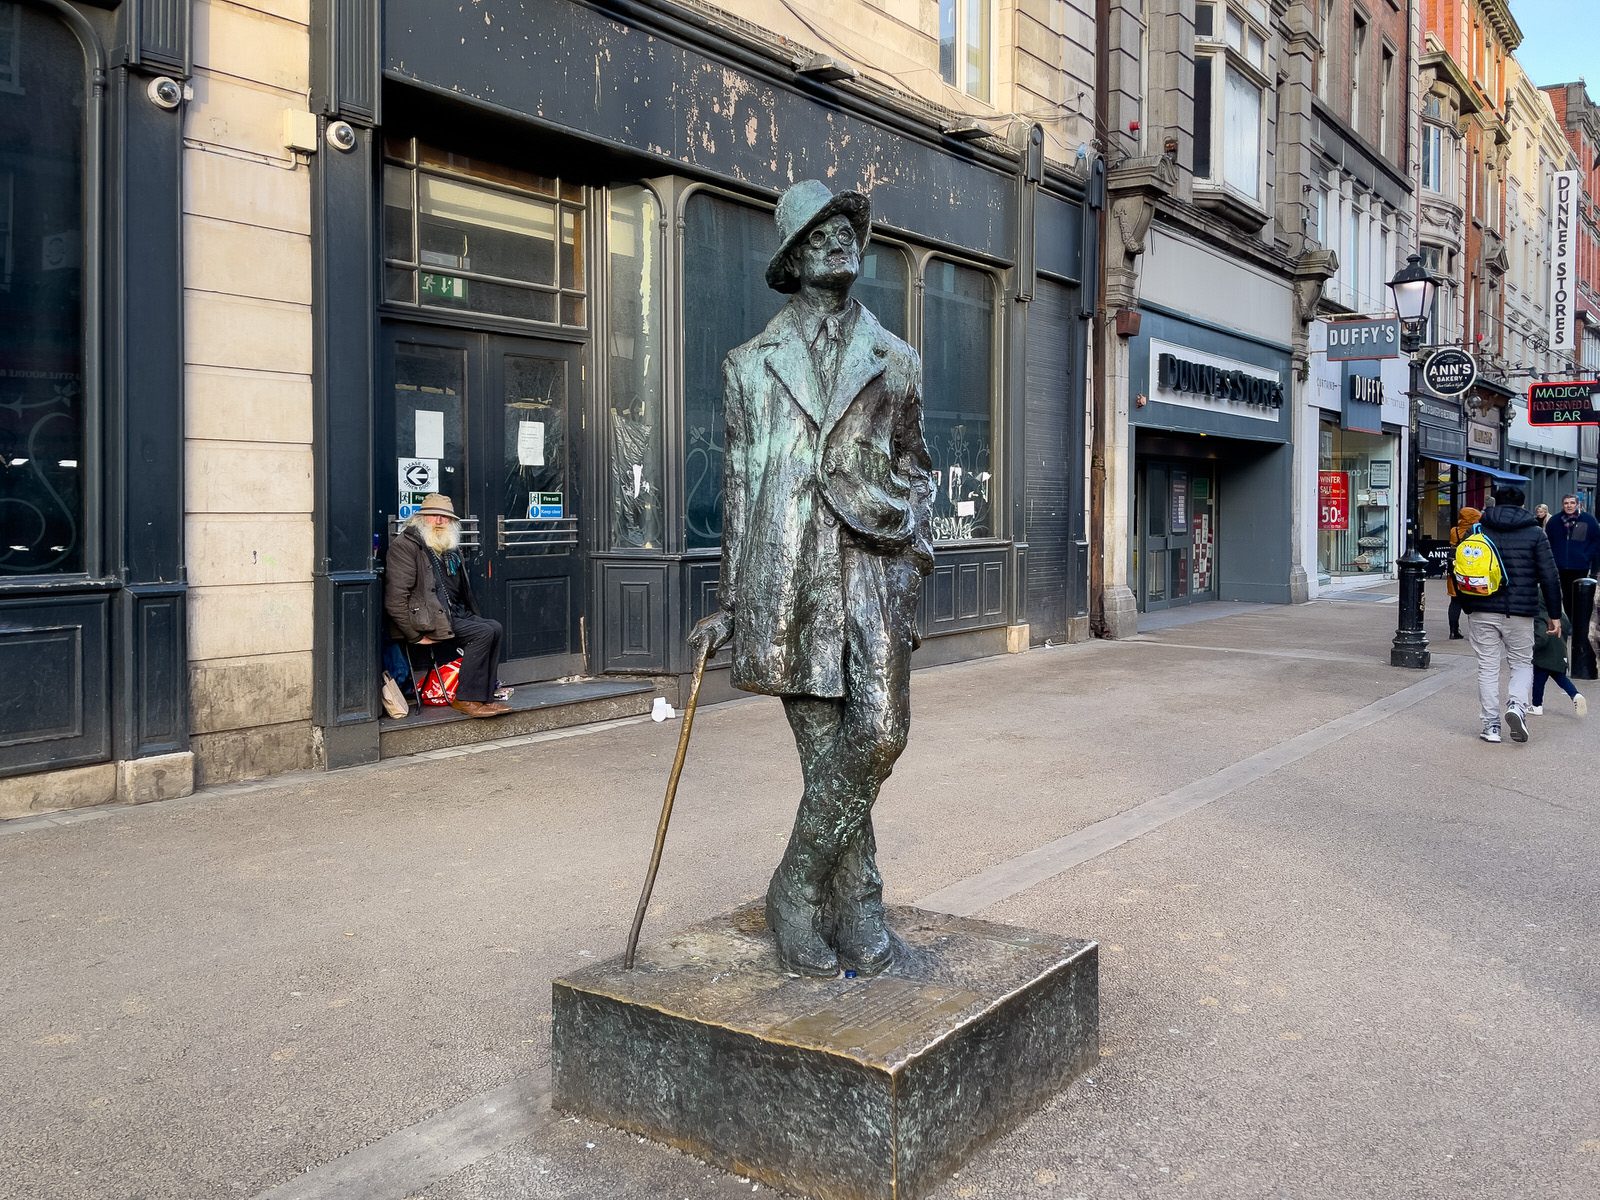 JAMES JOYCE STATUE BY MAJORIE FITZGIBBON [THE STATUE ITSELF HAS ATTRACTED A SOMEWHAT RUDE NICKNAME]-223037-1